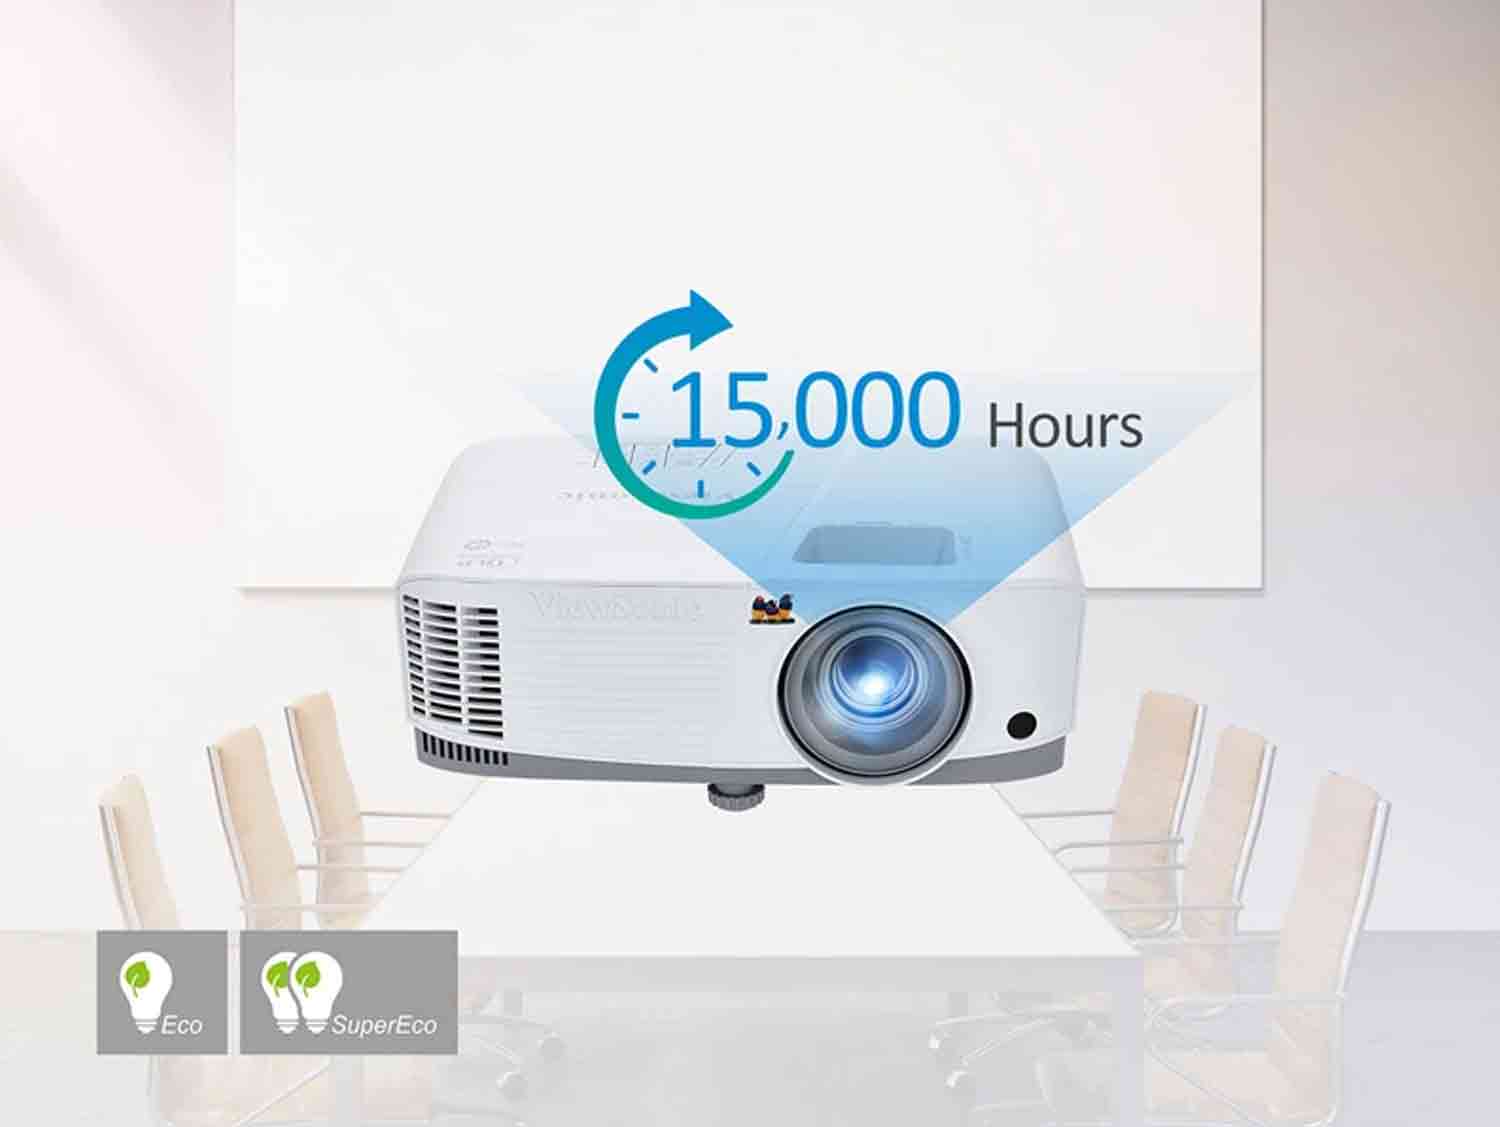 Rent the ViewSonic PA-503XE 4000 Lumens XGA Projector in Sri Lanka for weddings, corporate events, and more. Bright, clear visuals for any occasion.